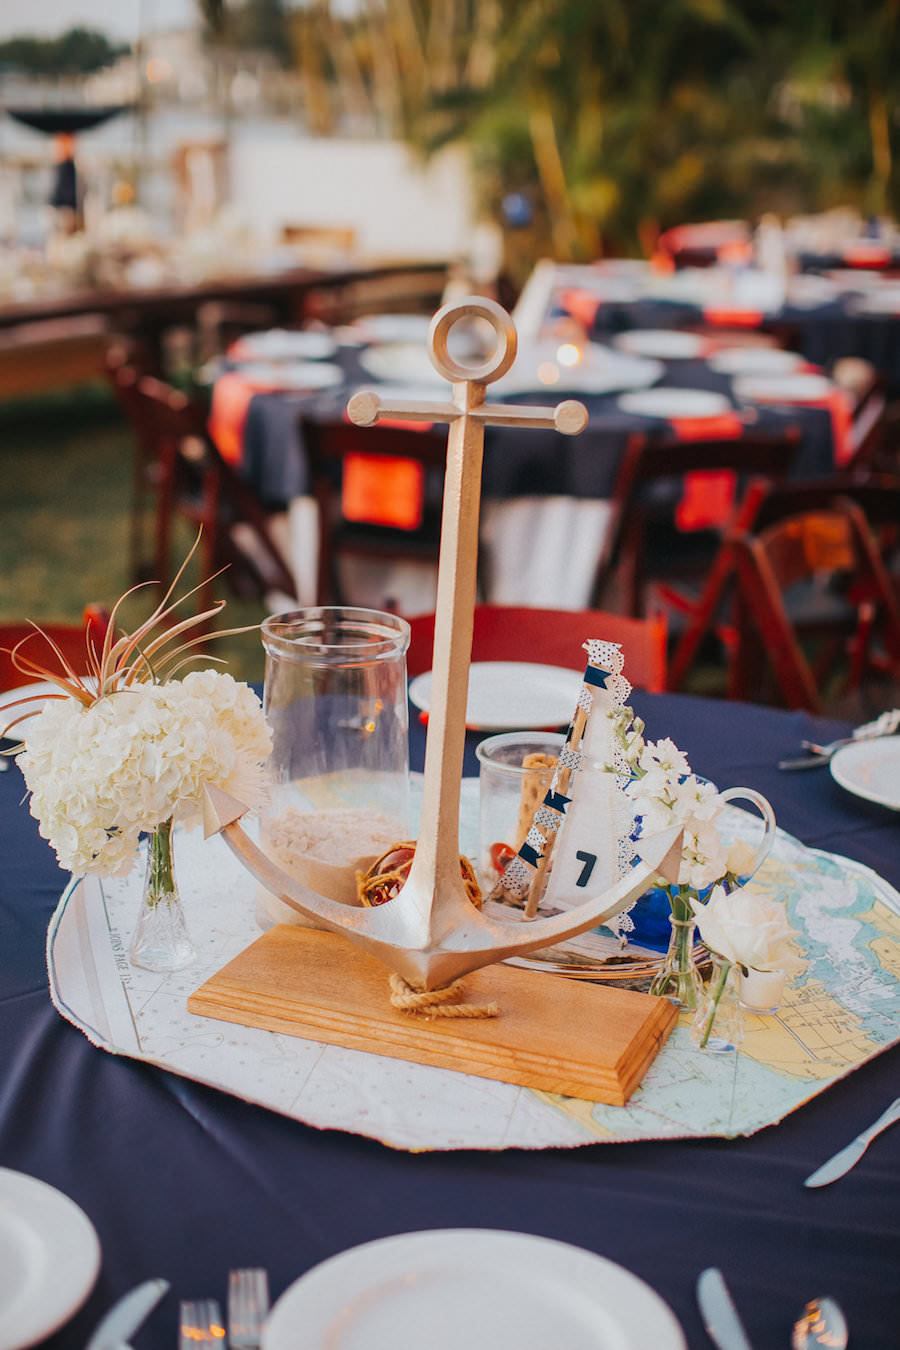 Tampa Outdoor Waterfront Wedding Reception Decor with Nautical Anchor Table Decorations with Globes, Anchors and Navy and Red Linens